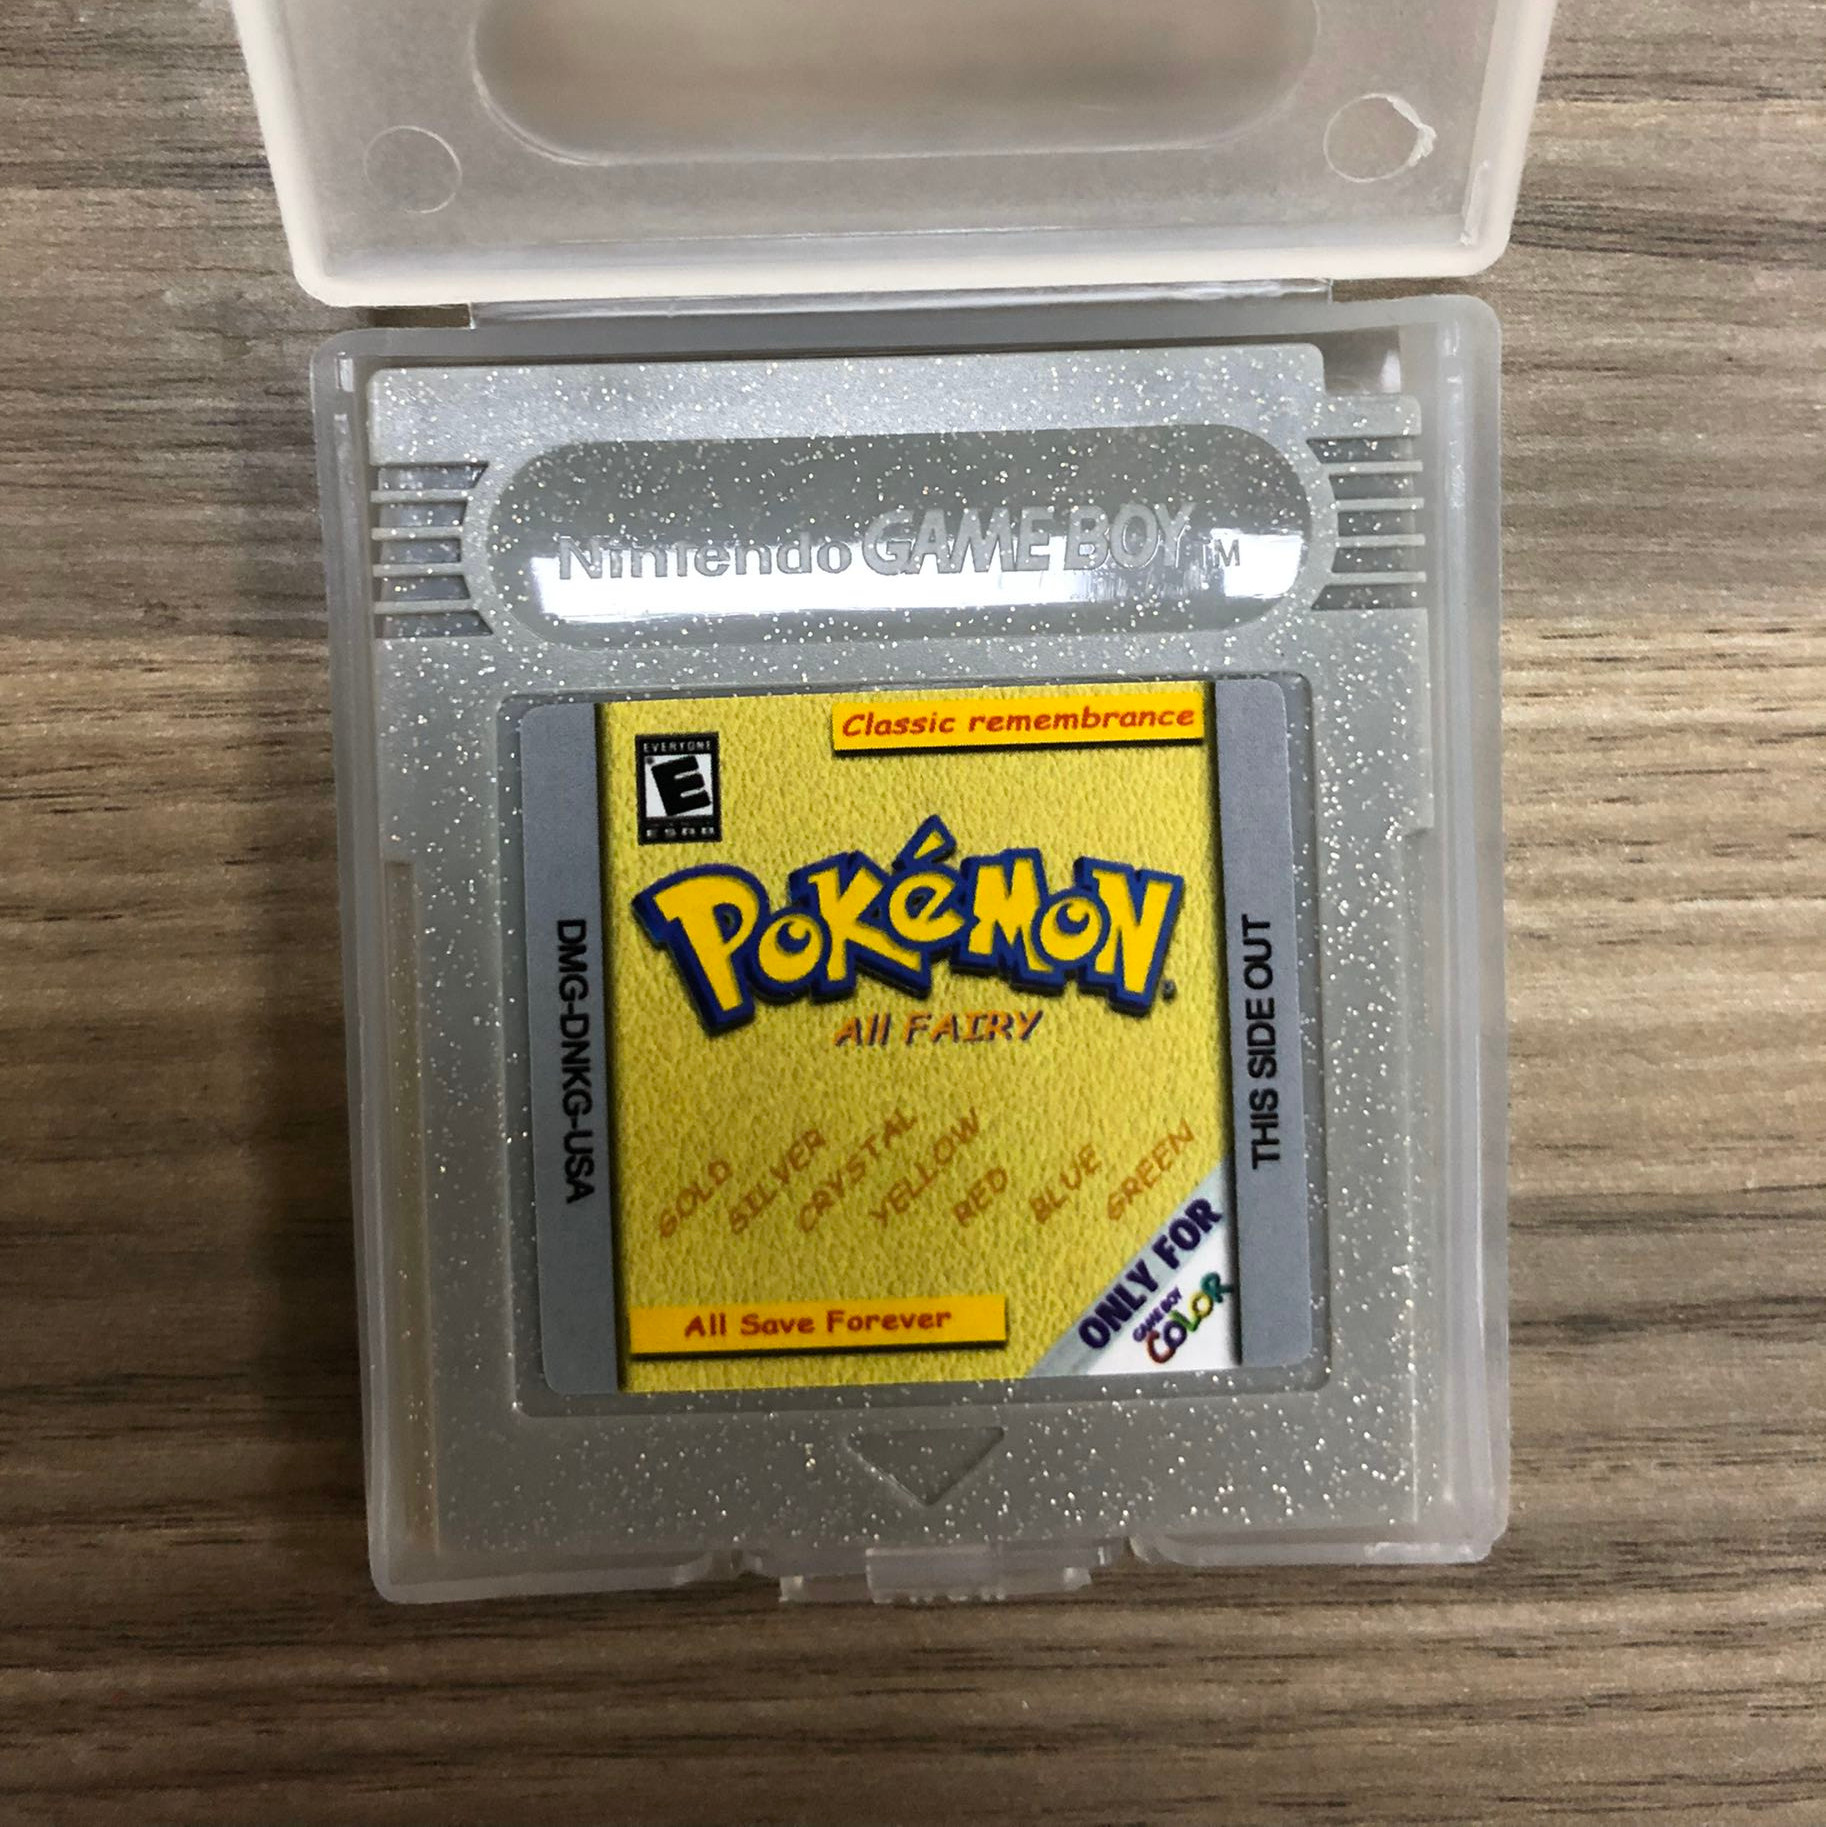 Pokémon Gold GameBoy Color Game w/ Saves - on Sale